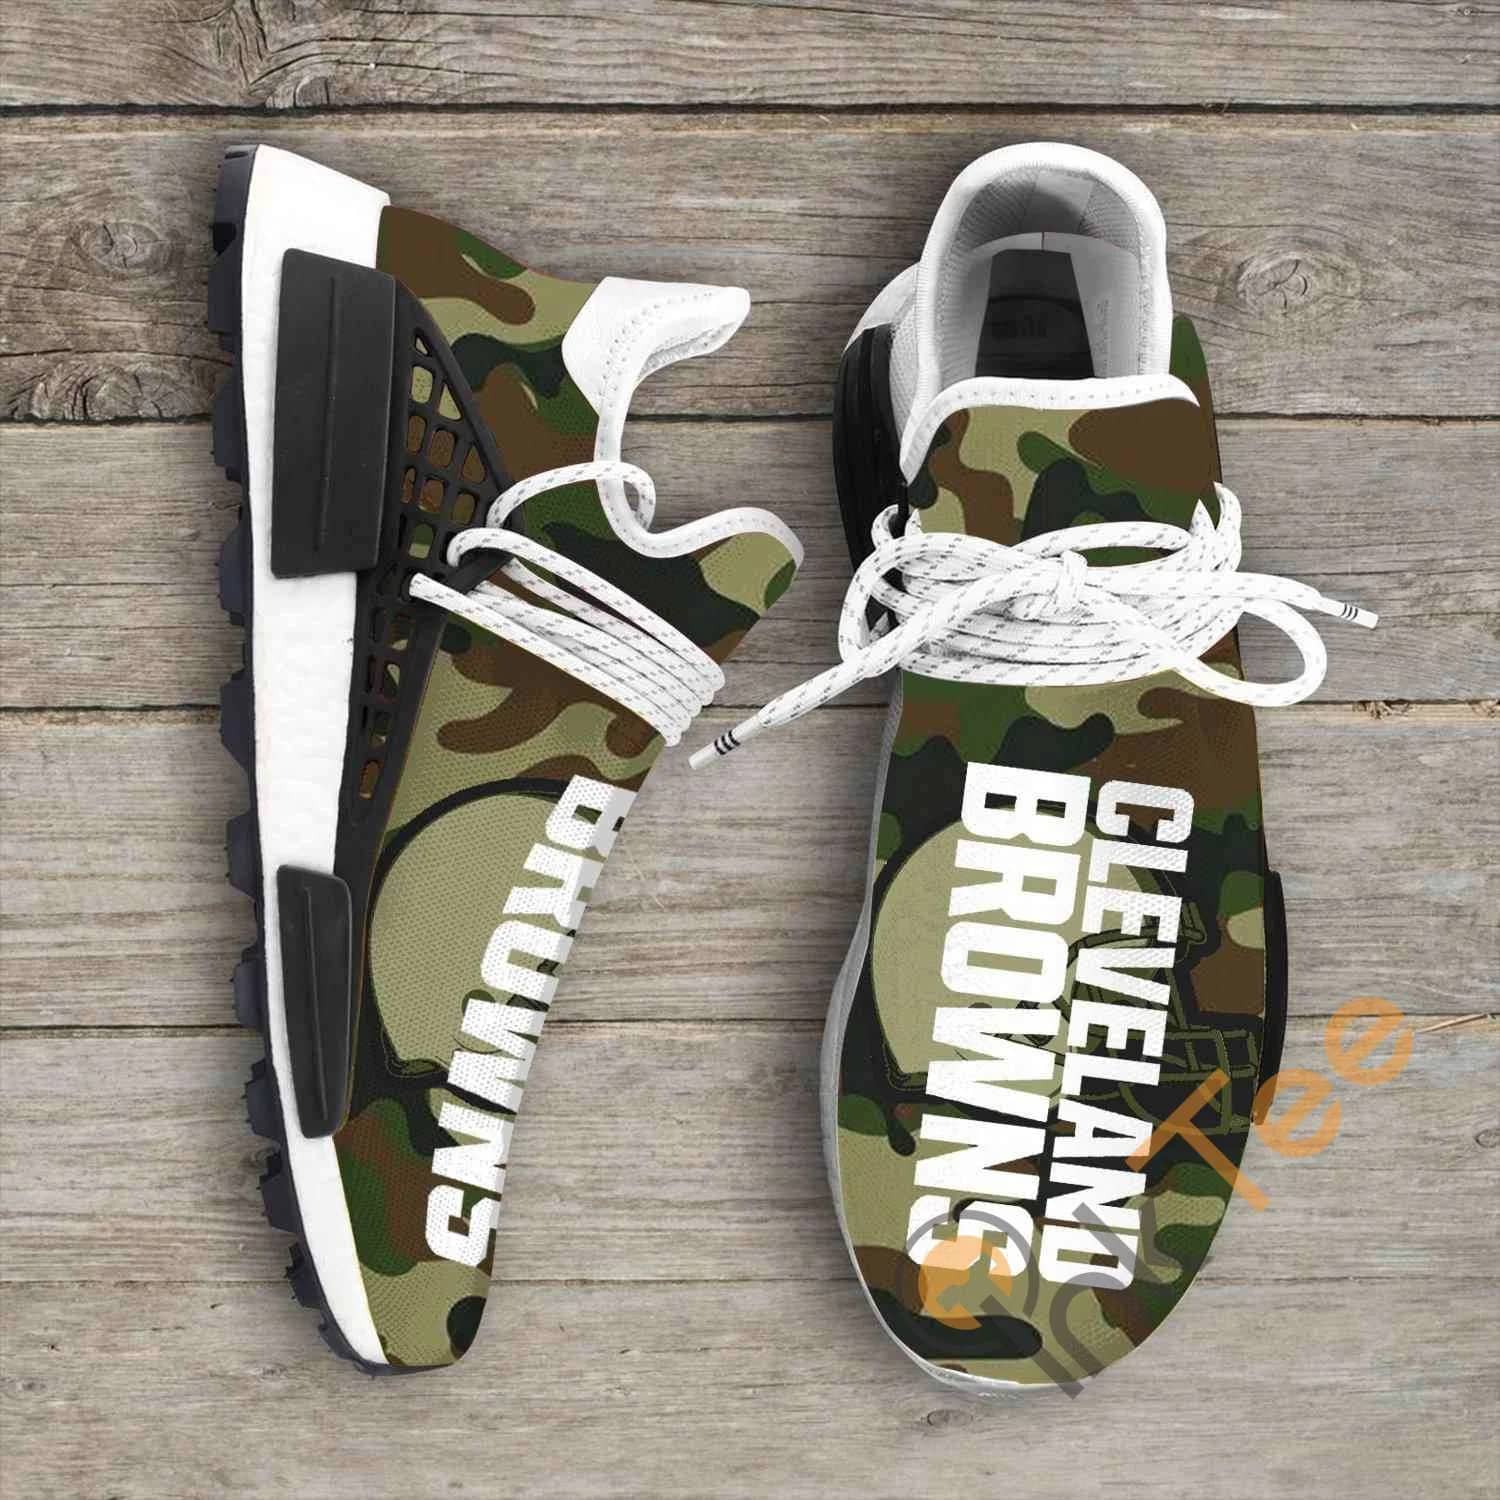 Camo Camouflage Cleveland Browns Nfl Nmd Human Shoes